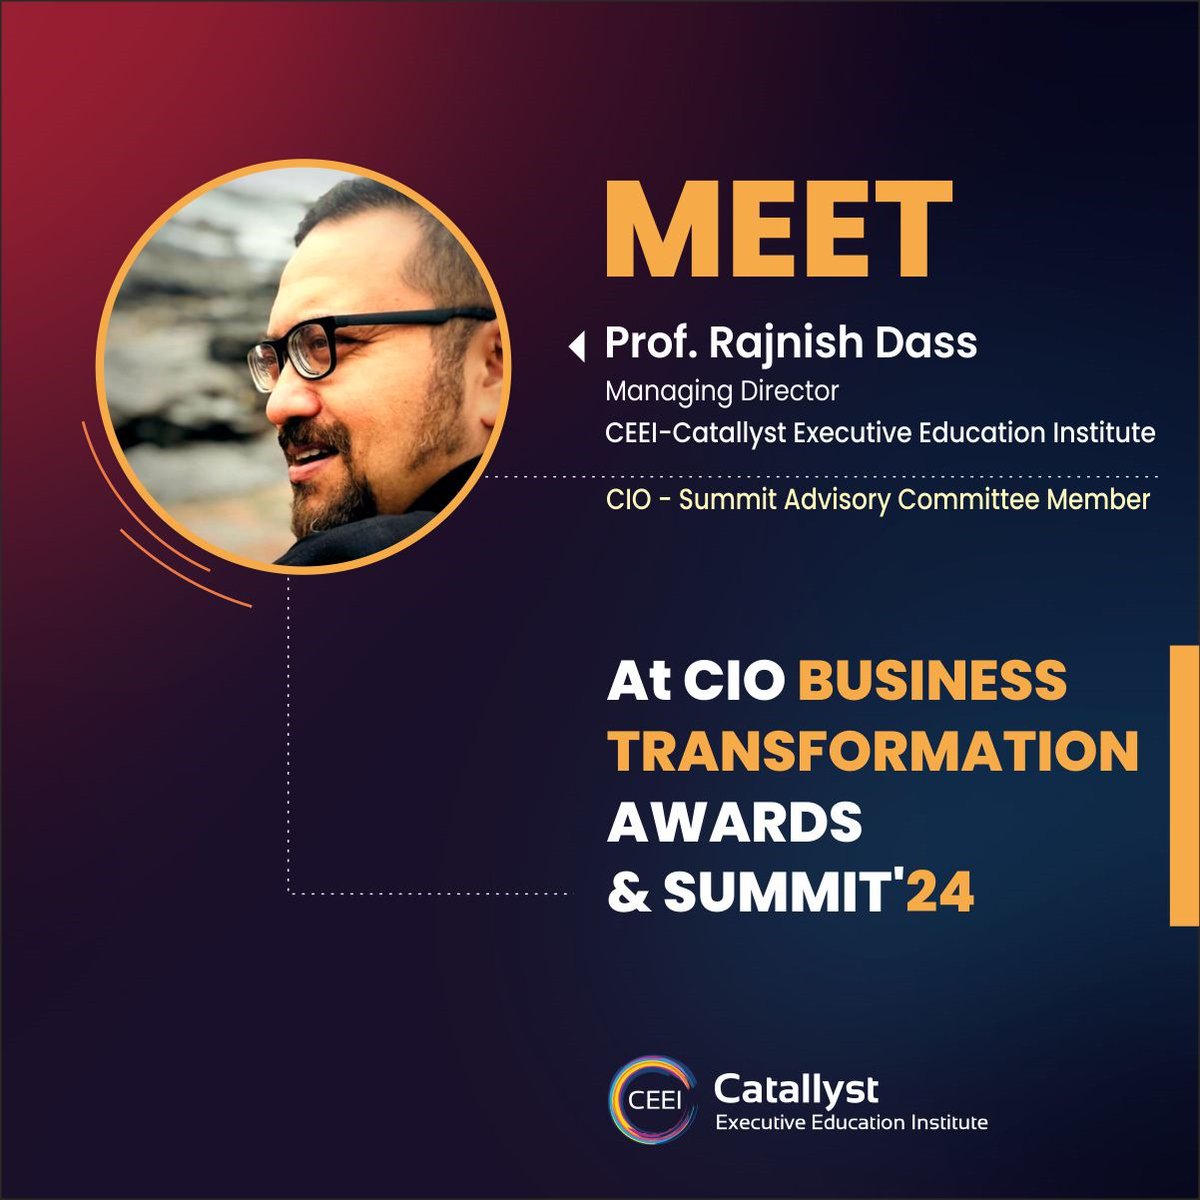 Introducing - The CIO Business Transformation Awards and Summit 2024! Join us and meet with the advisory committee comprising industry visionaries. Express interest now: bit.ly/491oQ9S
#ISMGExcellenceAwards #ISMGConference #ISMGSummits #CIOAwards2024 #CIOinc #CEEI